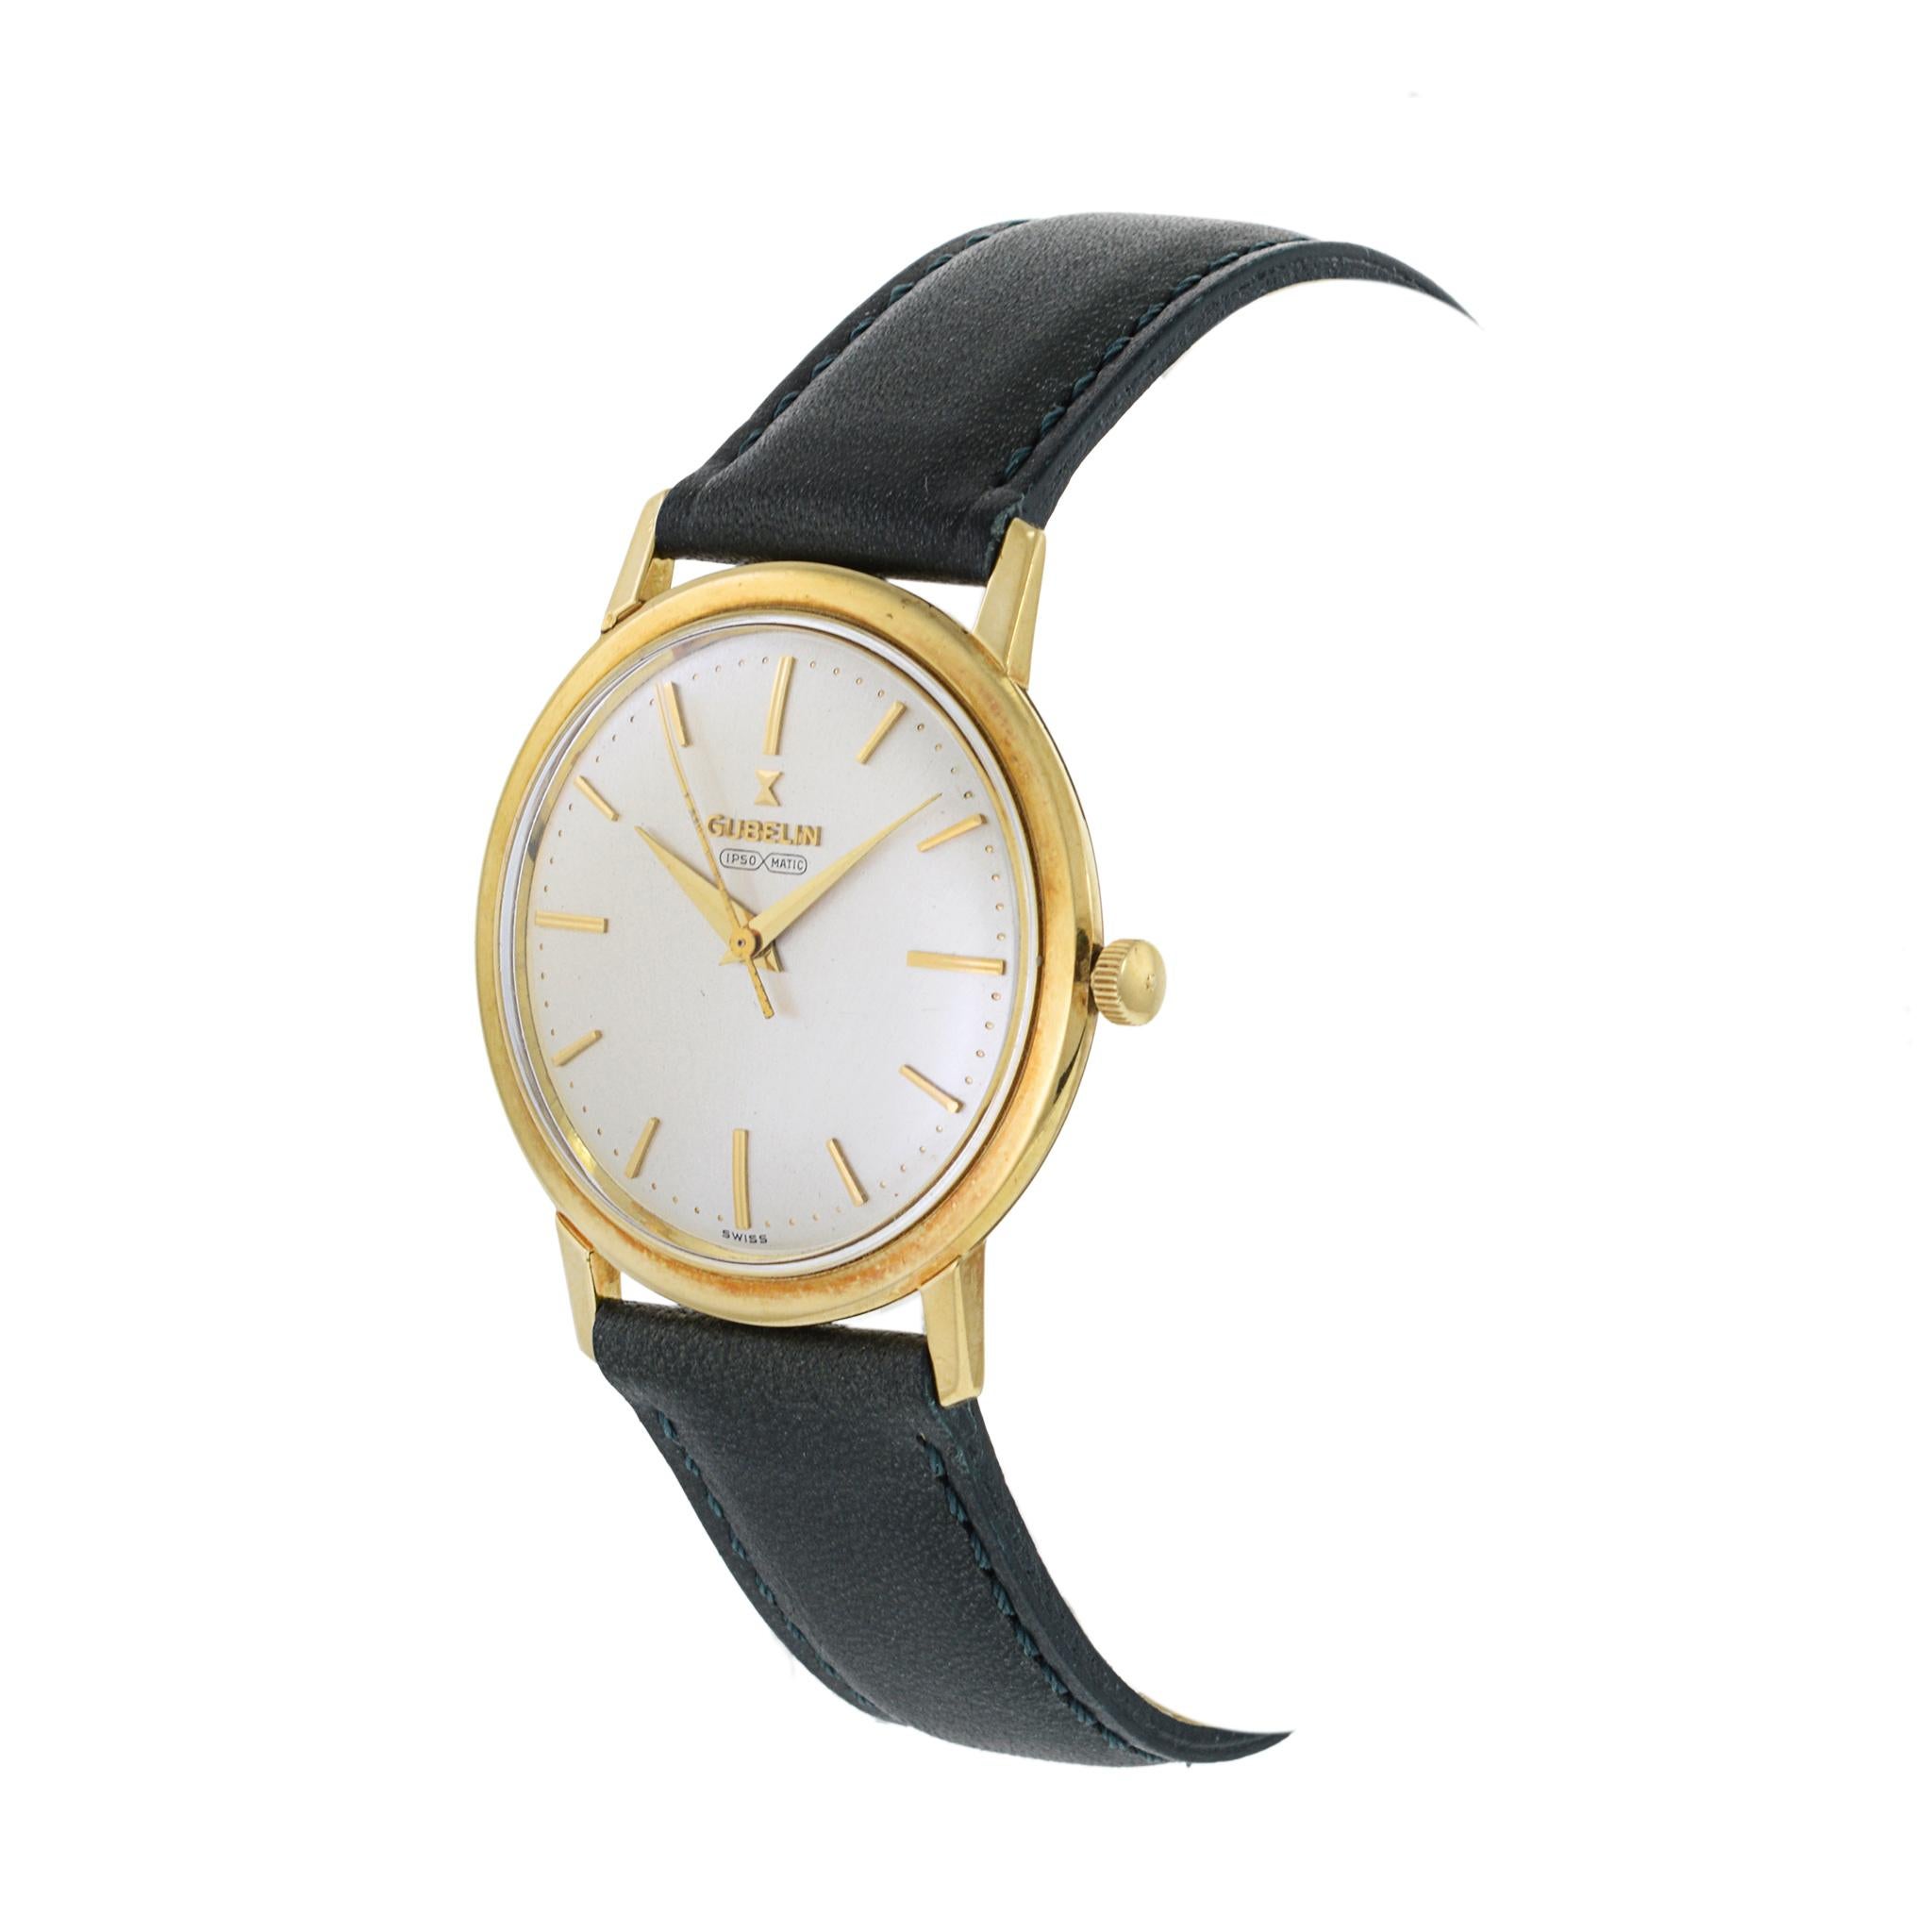 This is an example of 1960's watchmaking at its finest. This highly collectible Gubelin Ipso Matic 18K watch is among the most collectible watches of this period.

This watch features a top quality 18k yellow gold Spillmann case which meausres 35mm